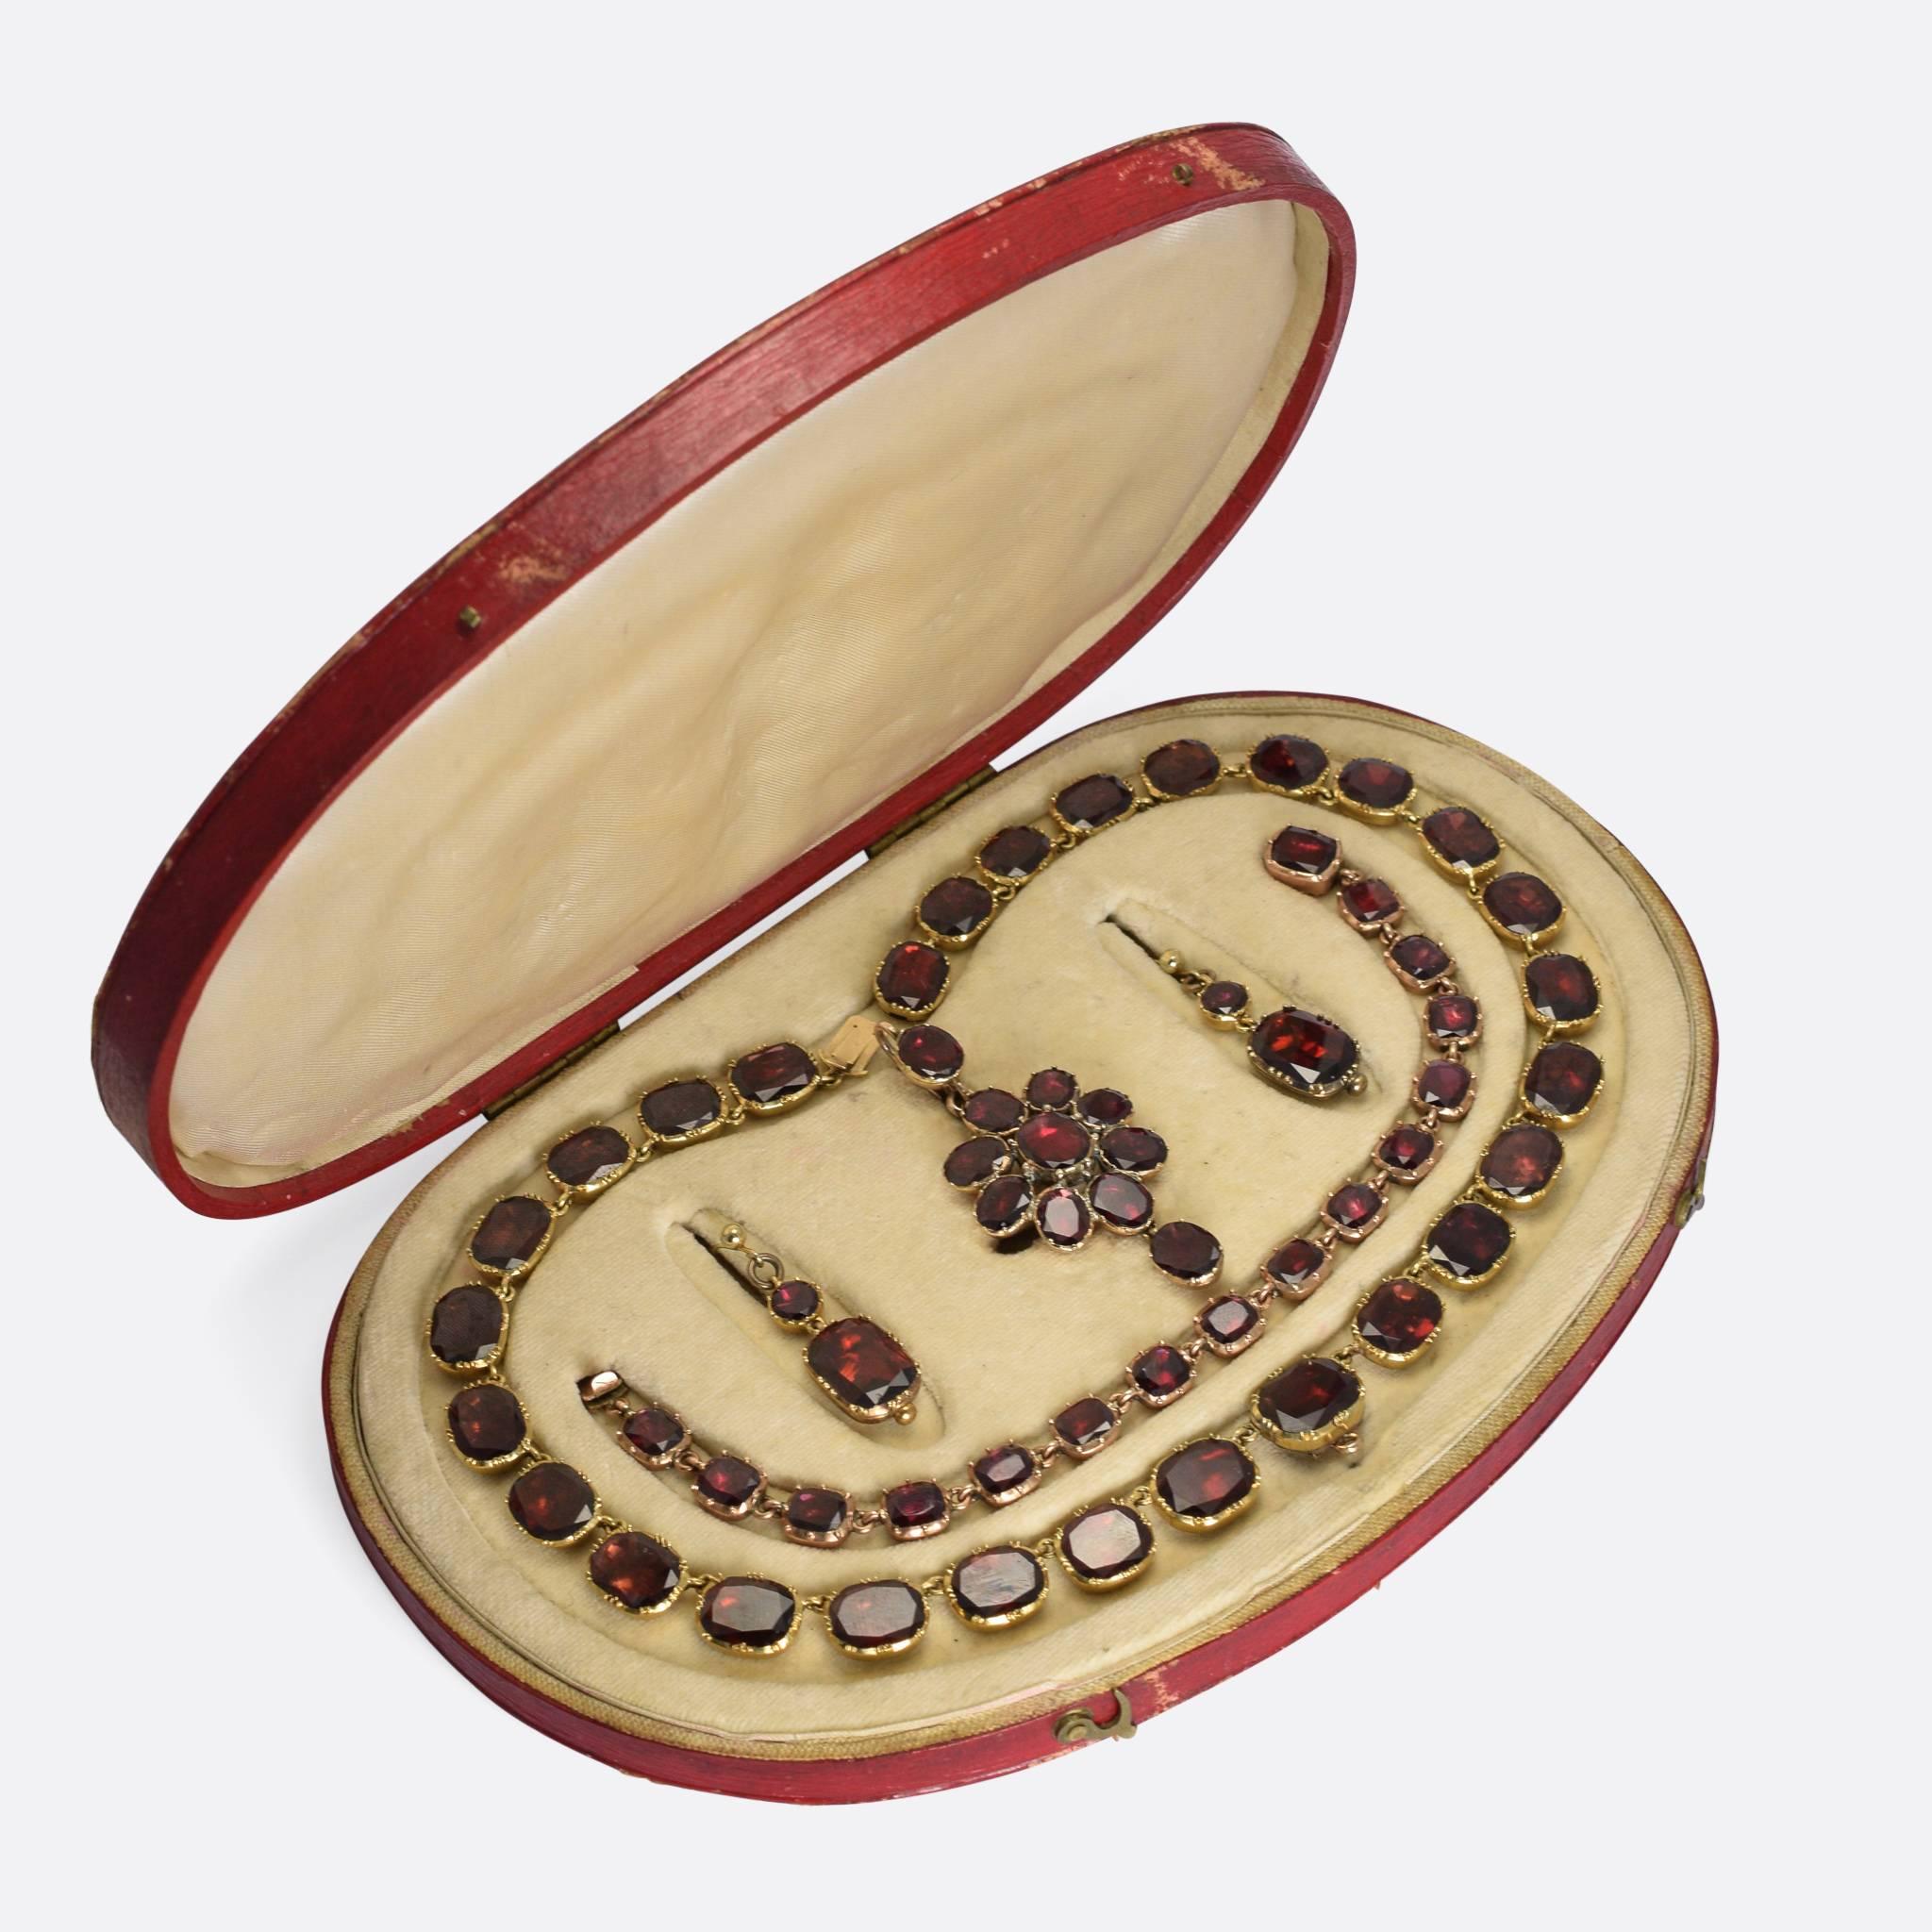 An extraordinary Georgian flat cut garnet suite, complete with original display box. It includes a full riviere necklace, a riviere bracelet, earrings, and a pendant that can also clip on to the necklace. The stones are bright with excellent colour,